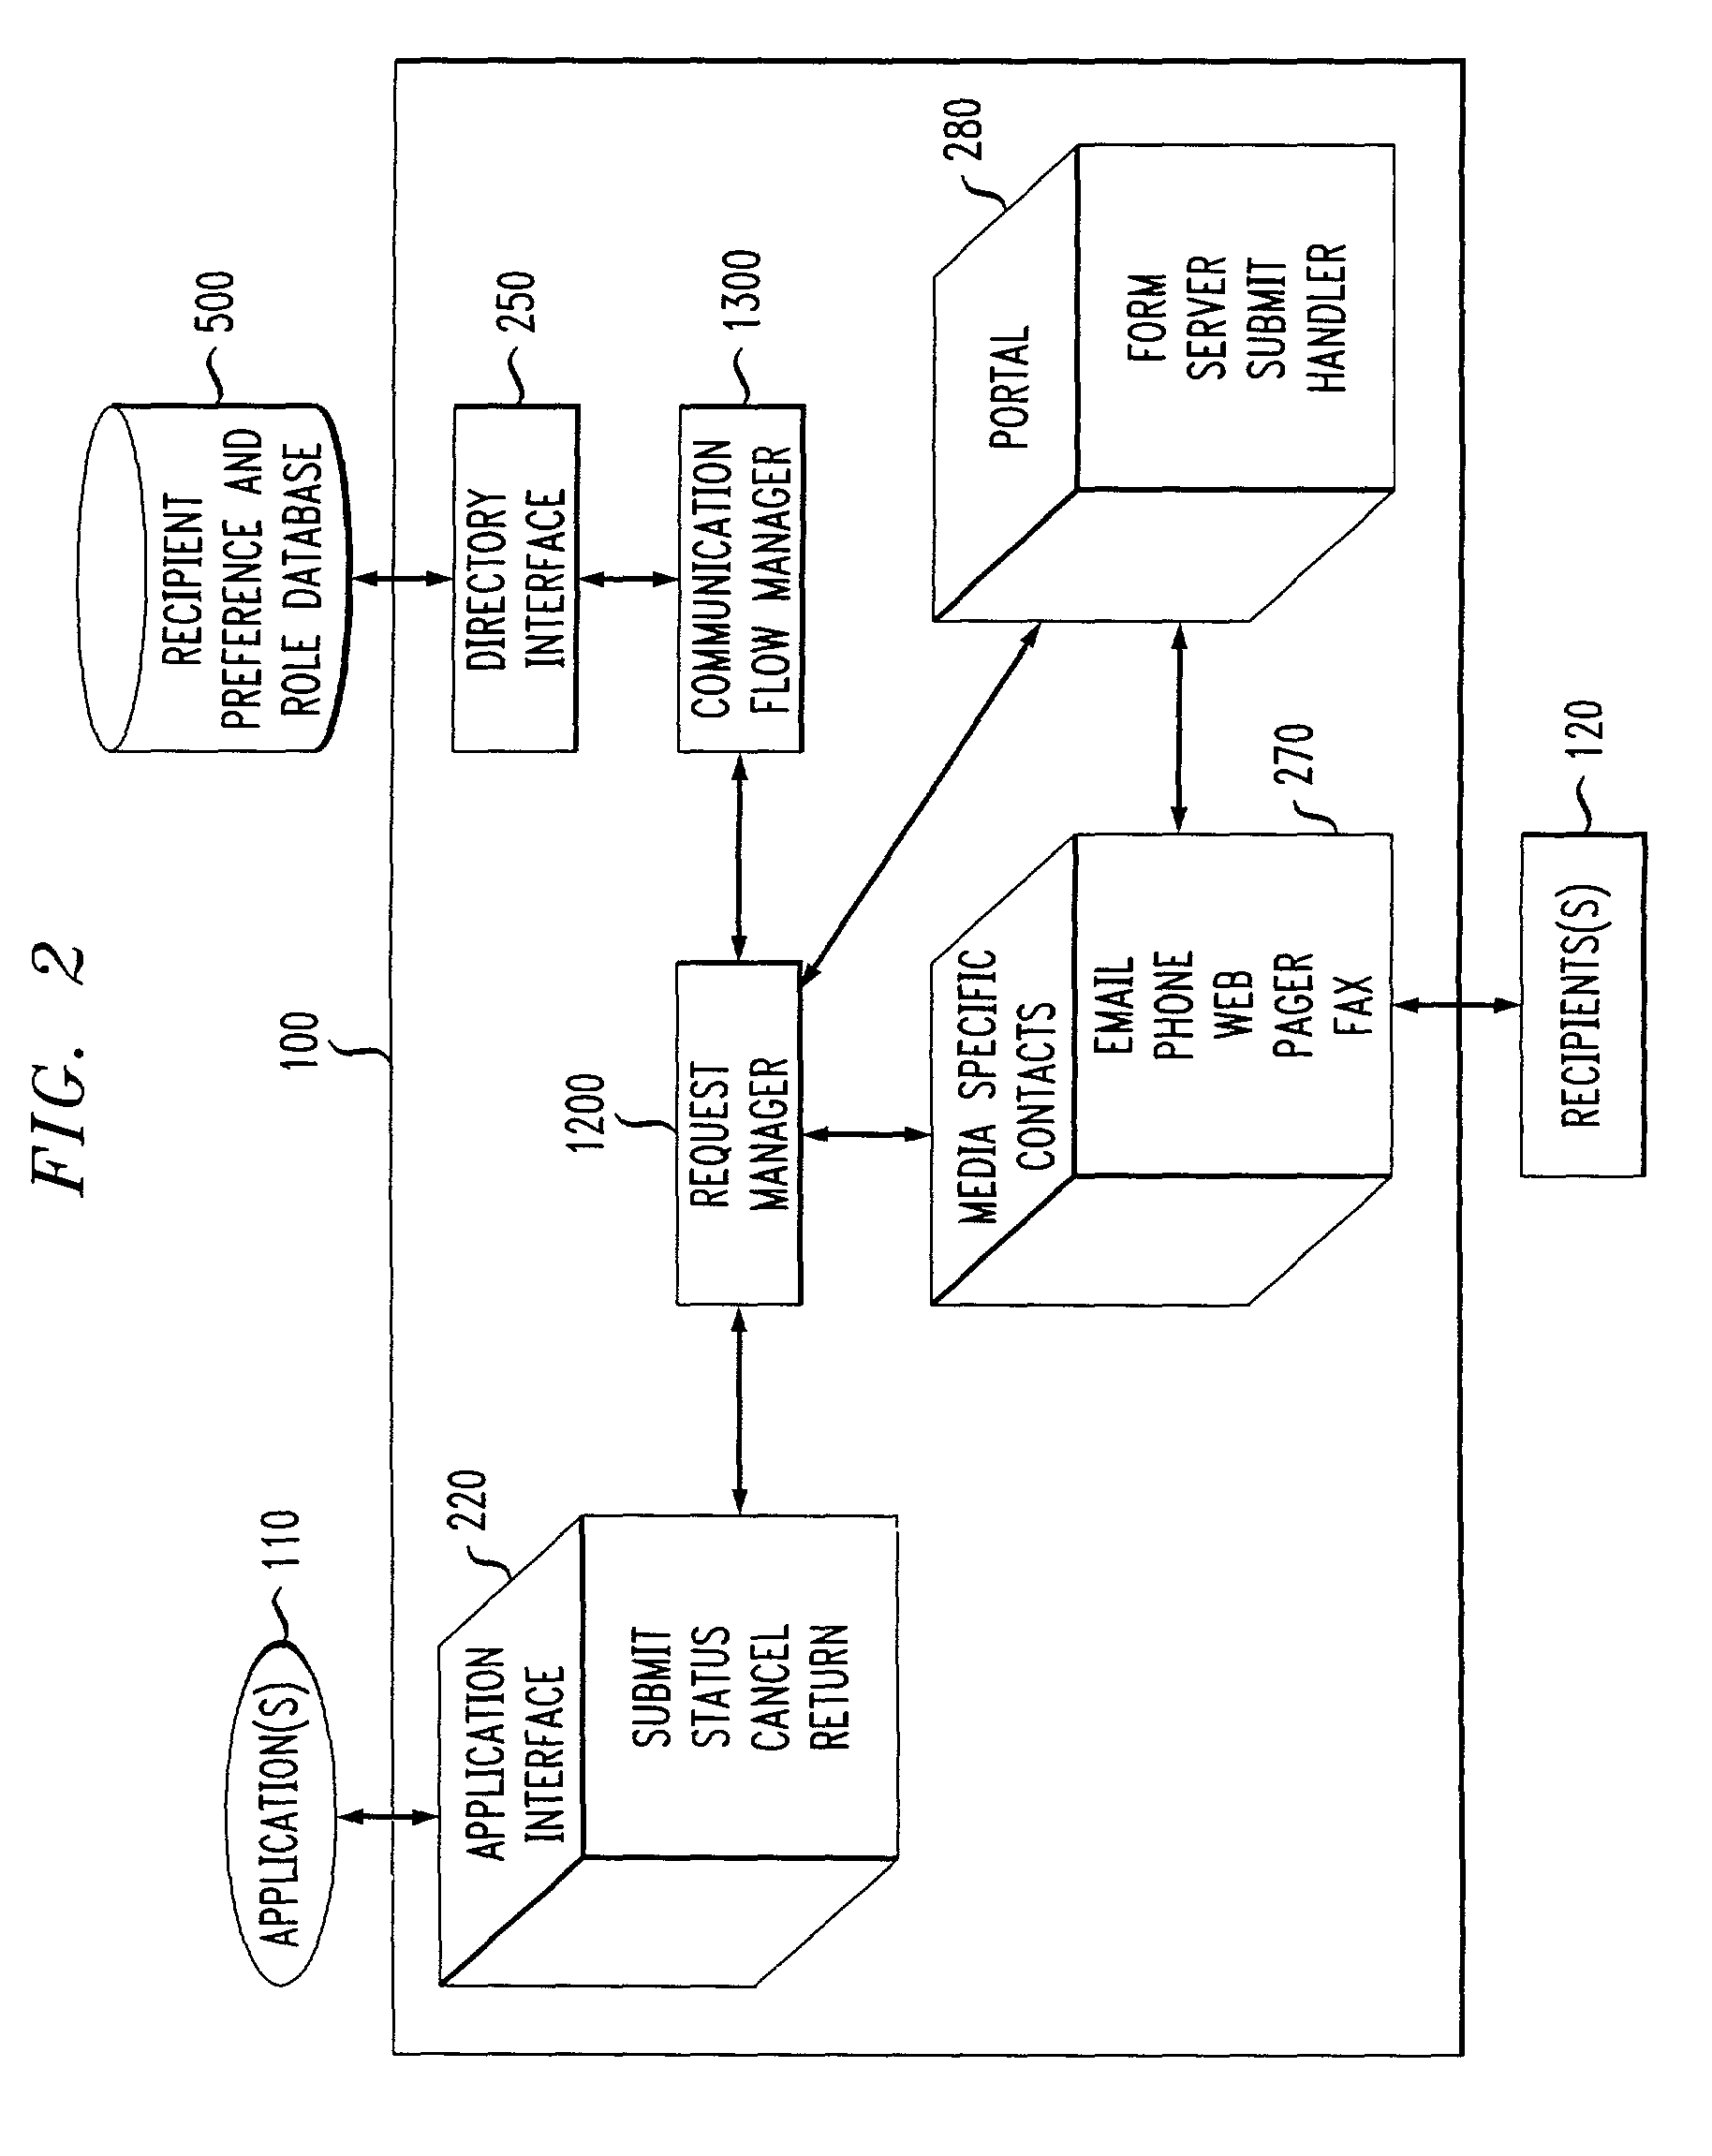 Method and apparatus for automatic notification and response